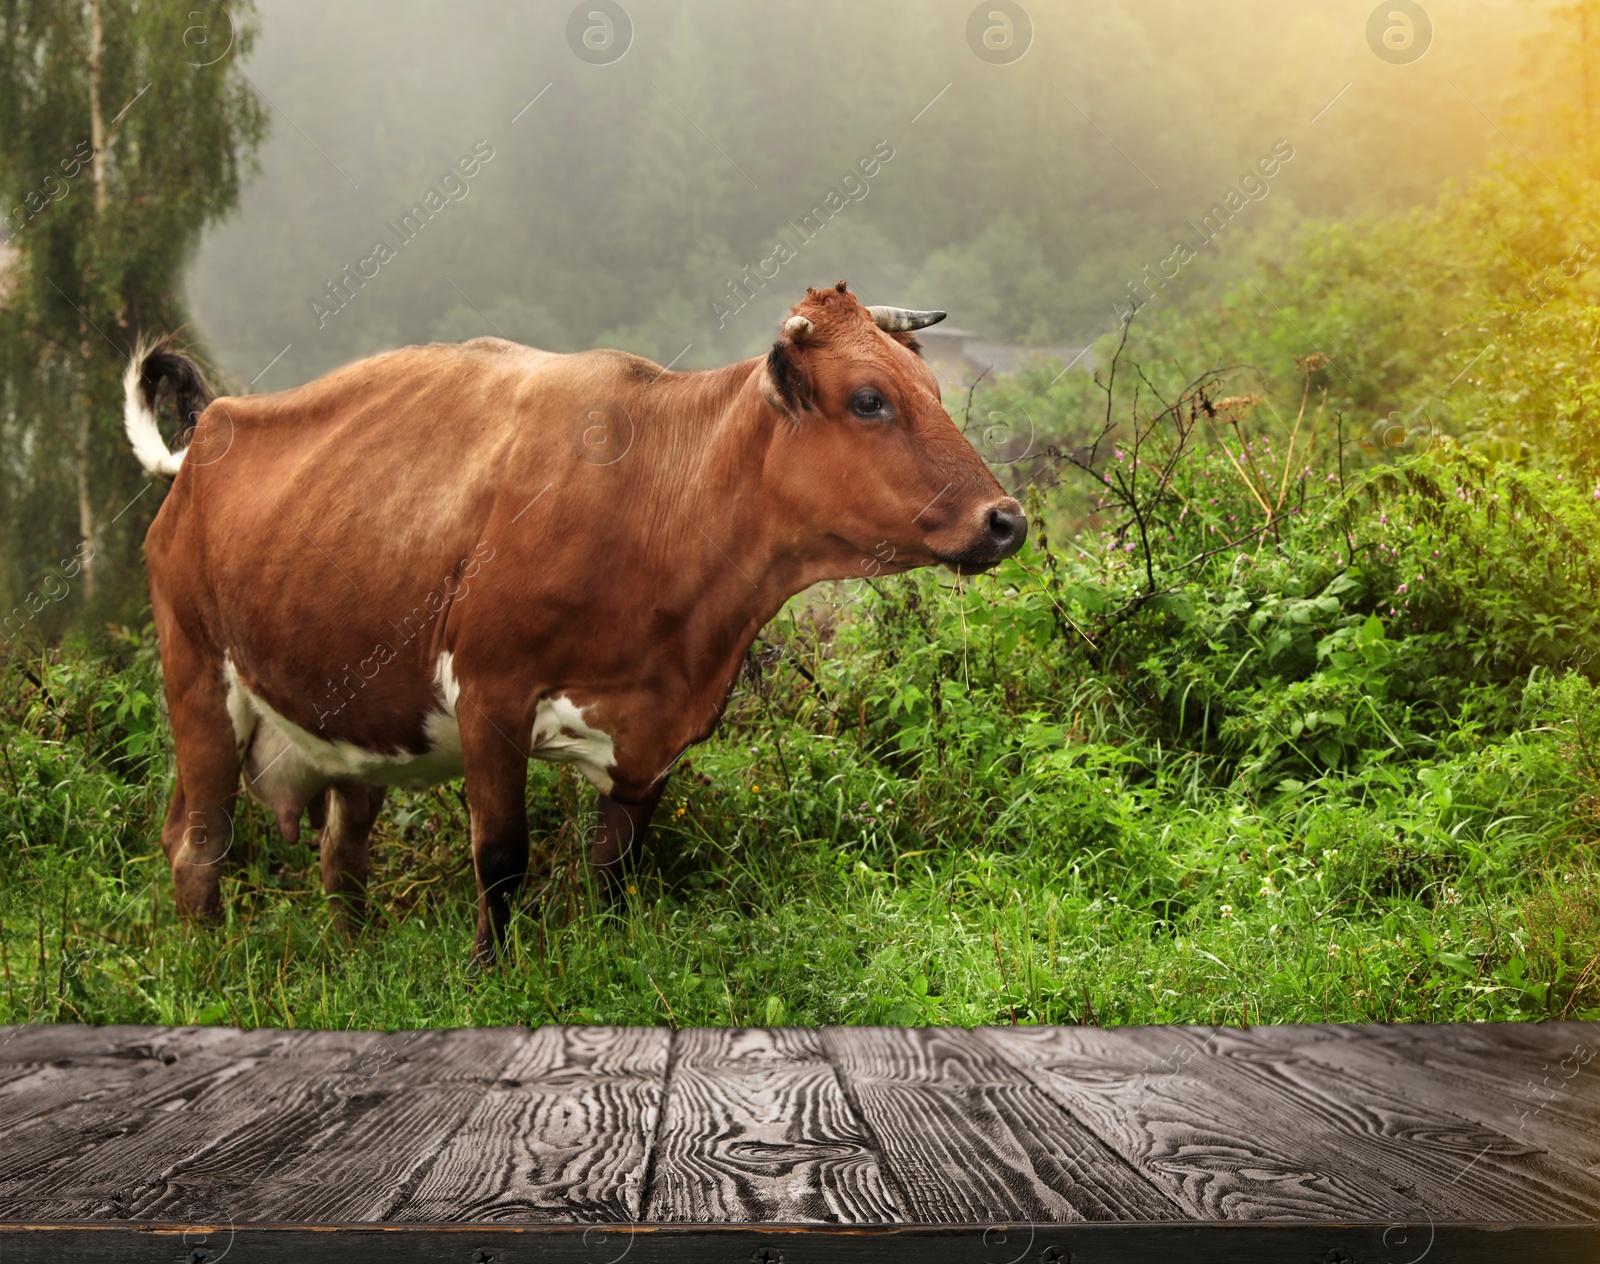 Image of Empty wooden table and cow grazing in field on background. Animal husbandry concept 